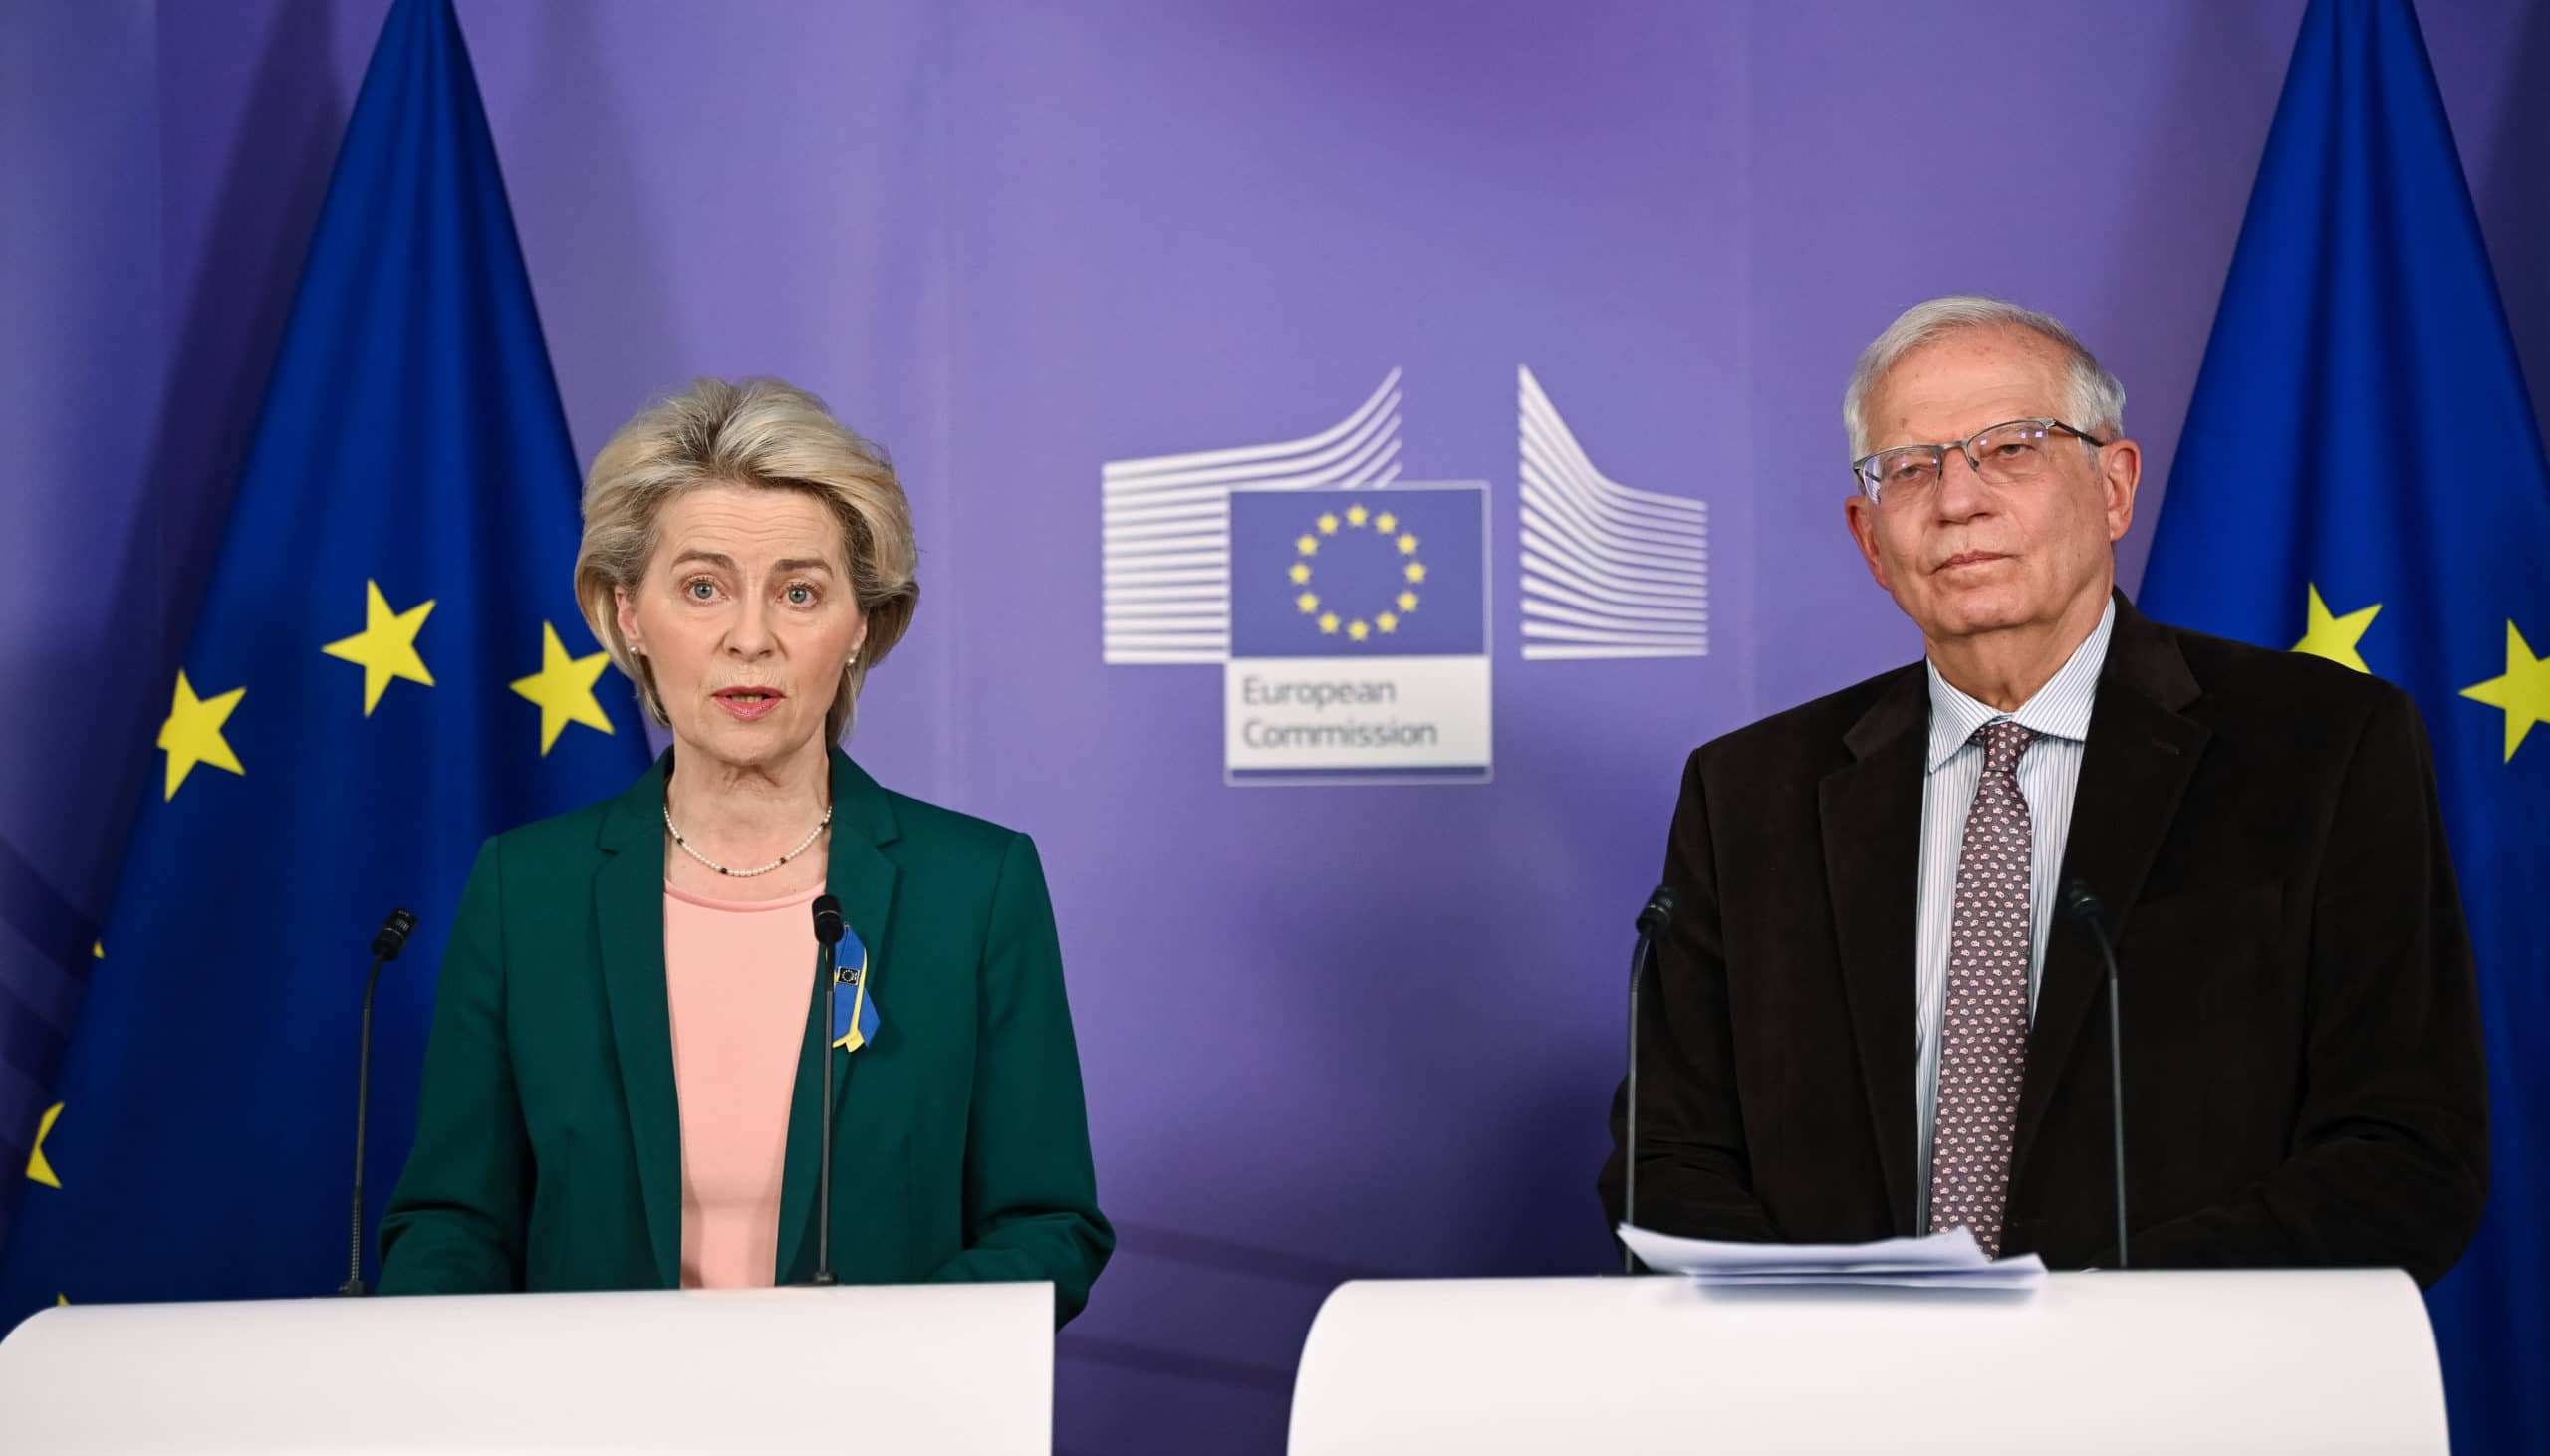 Ursula von der Leyen and Josep Borrell Fontelles standing in front of EU flags and the European Commission's logo holding a statement